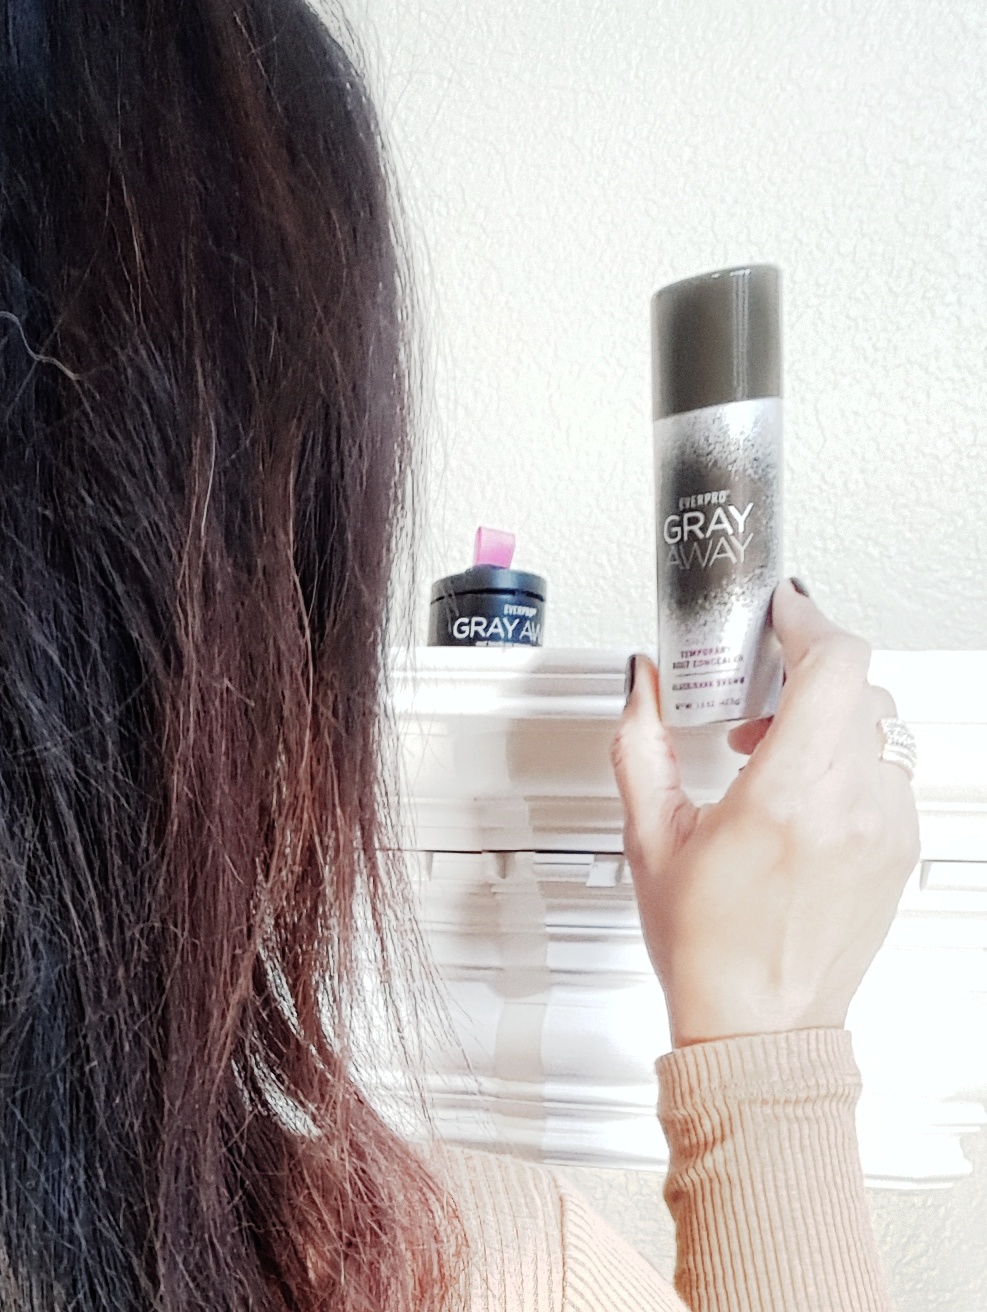 I Tried Gray Away Temporary Root Concealer Spray + Made a 'How to